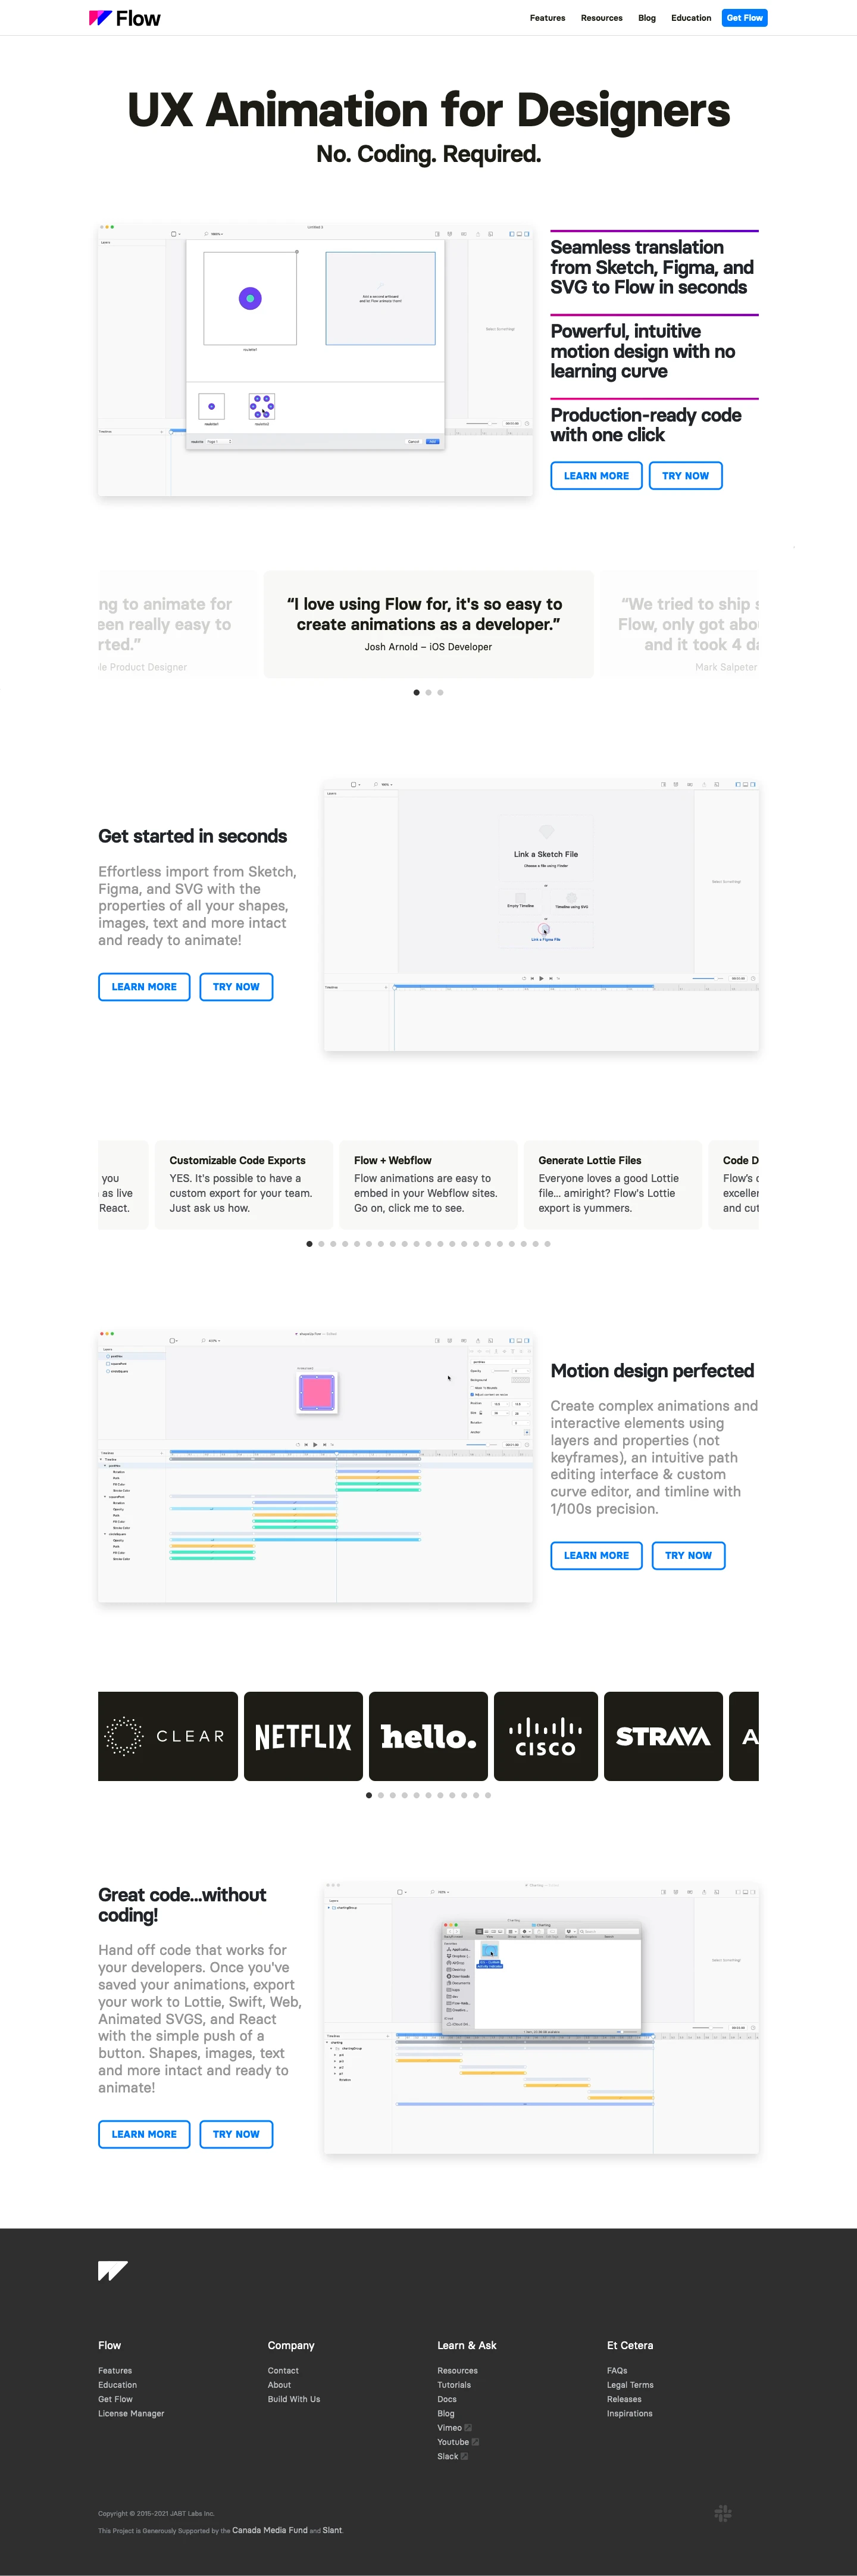 Flow Landing Page Example: UX Animation for Designers. Professional Animation Software, for iOS, Web and Lottie. Import from Sketch or Figma, animate with our powerful timeline editor, generate production-ready media or code your devs will love to work with.